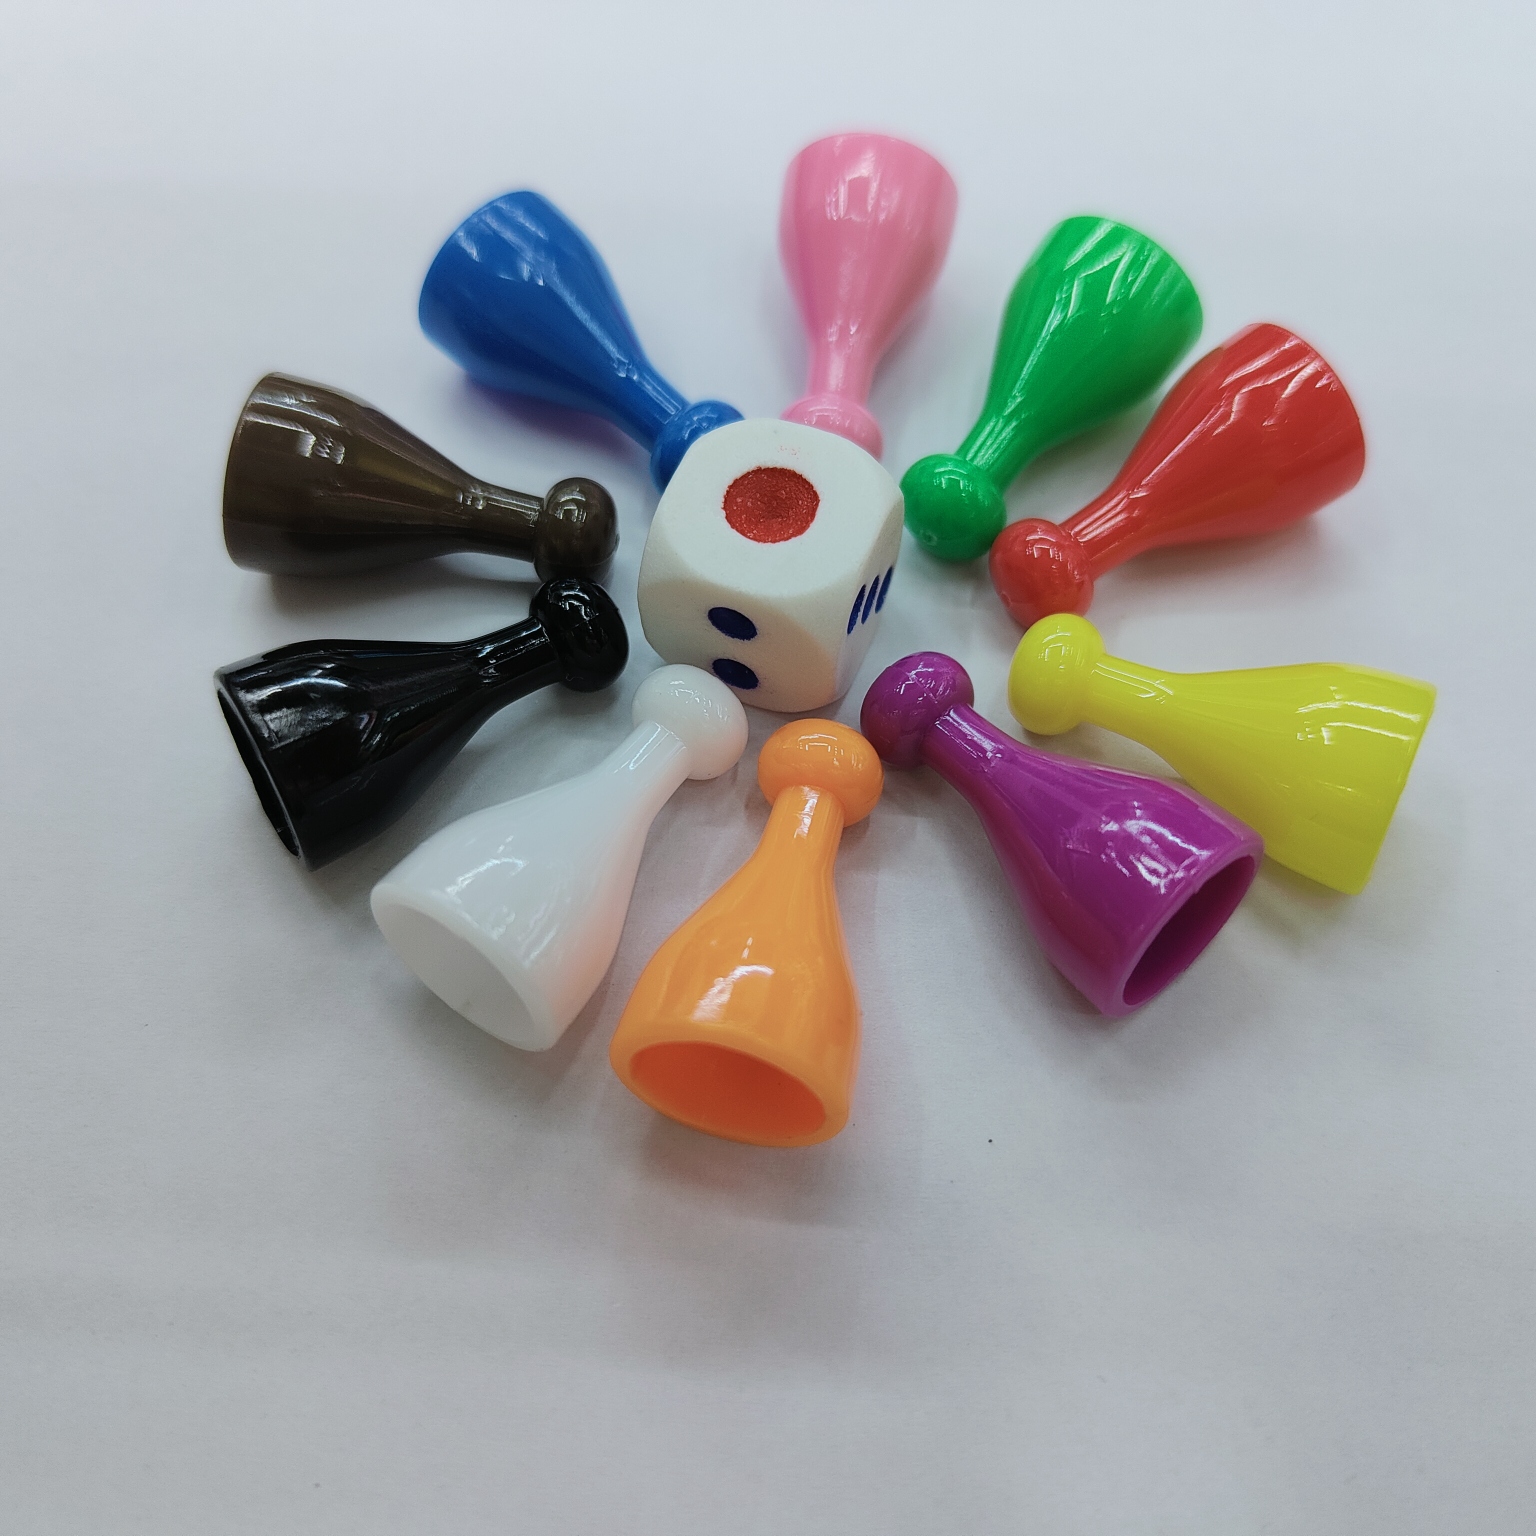 【Yiwu Haonan Sports】 Dice Plastic Chess Game Chess pieces transparent pawn horn pieces